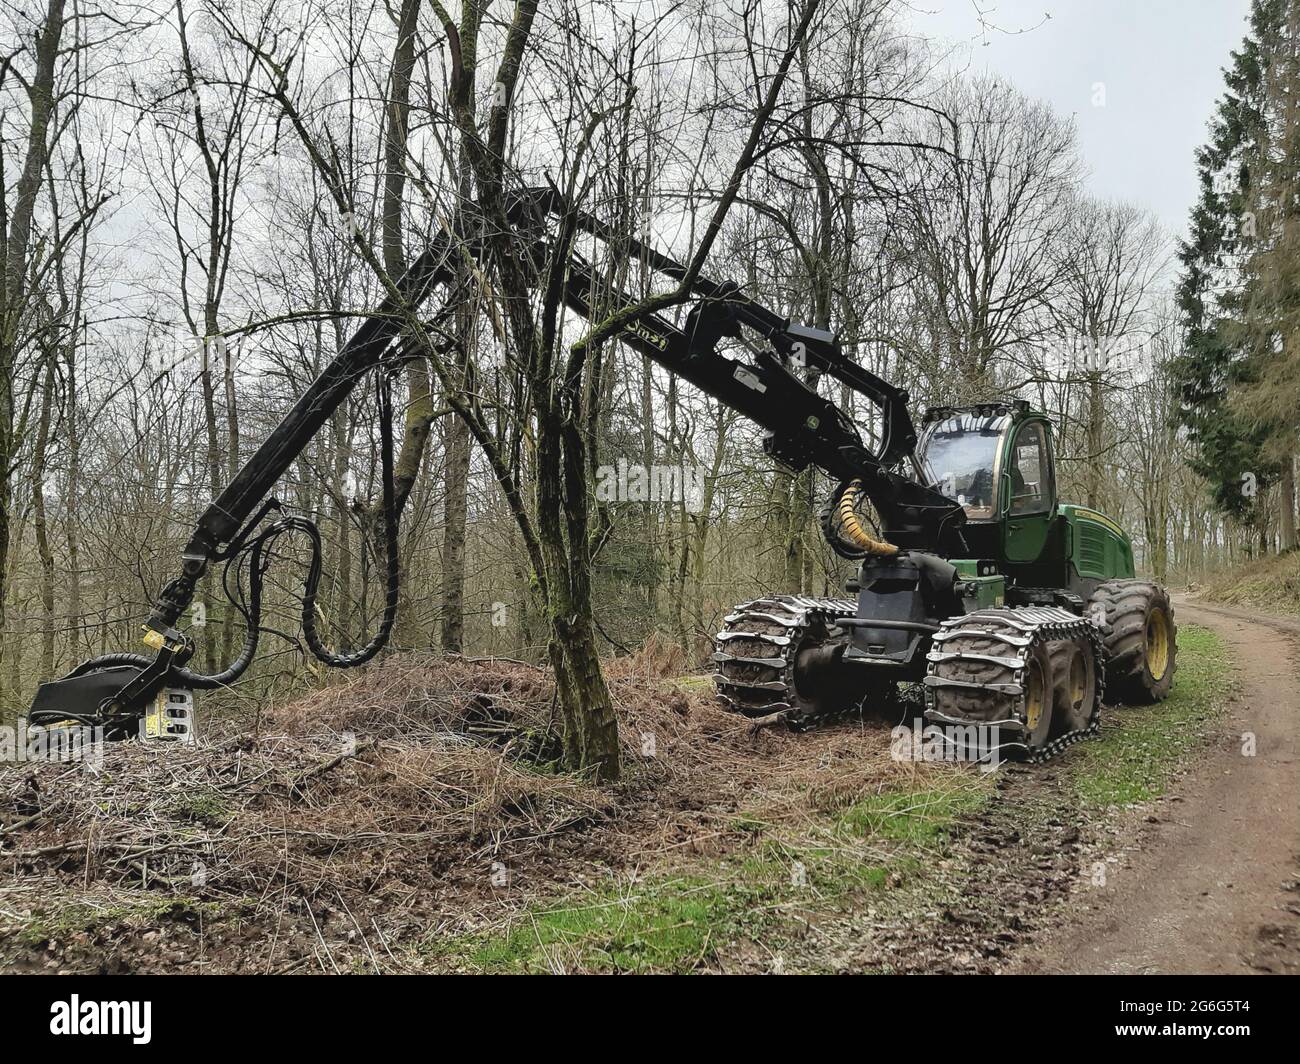 Harvester in the forest, Germany Stock Photo